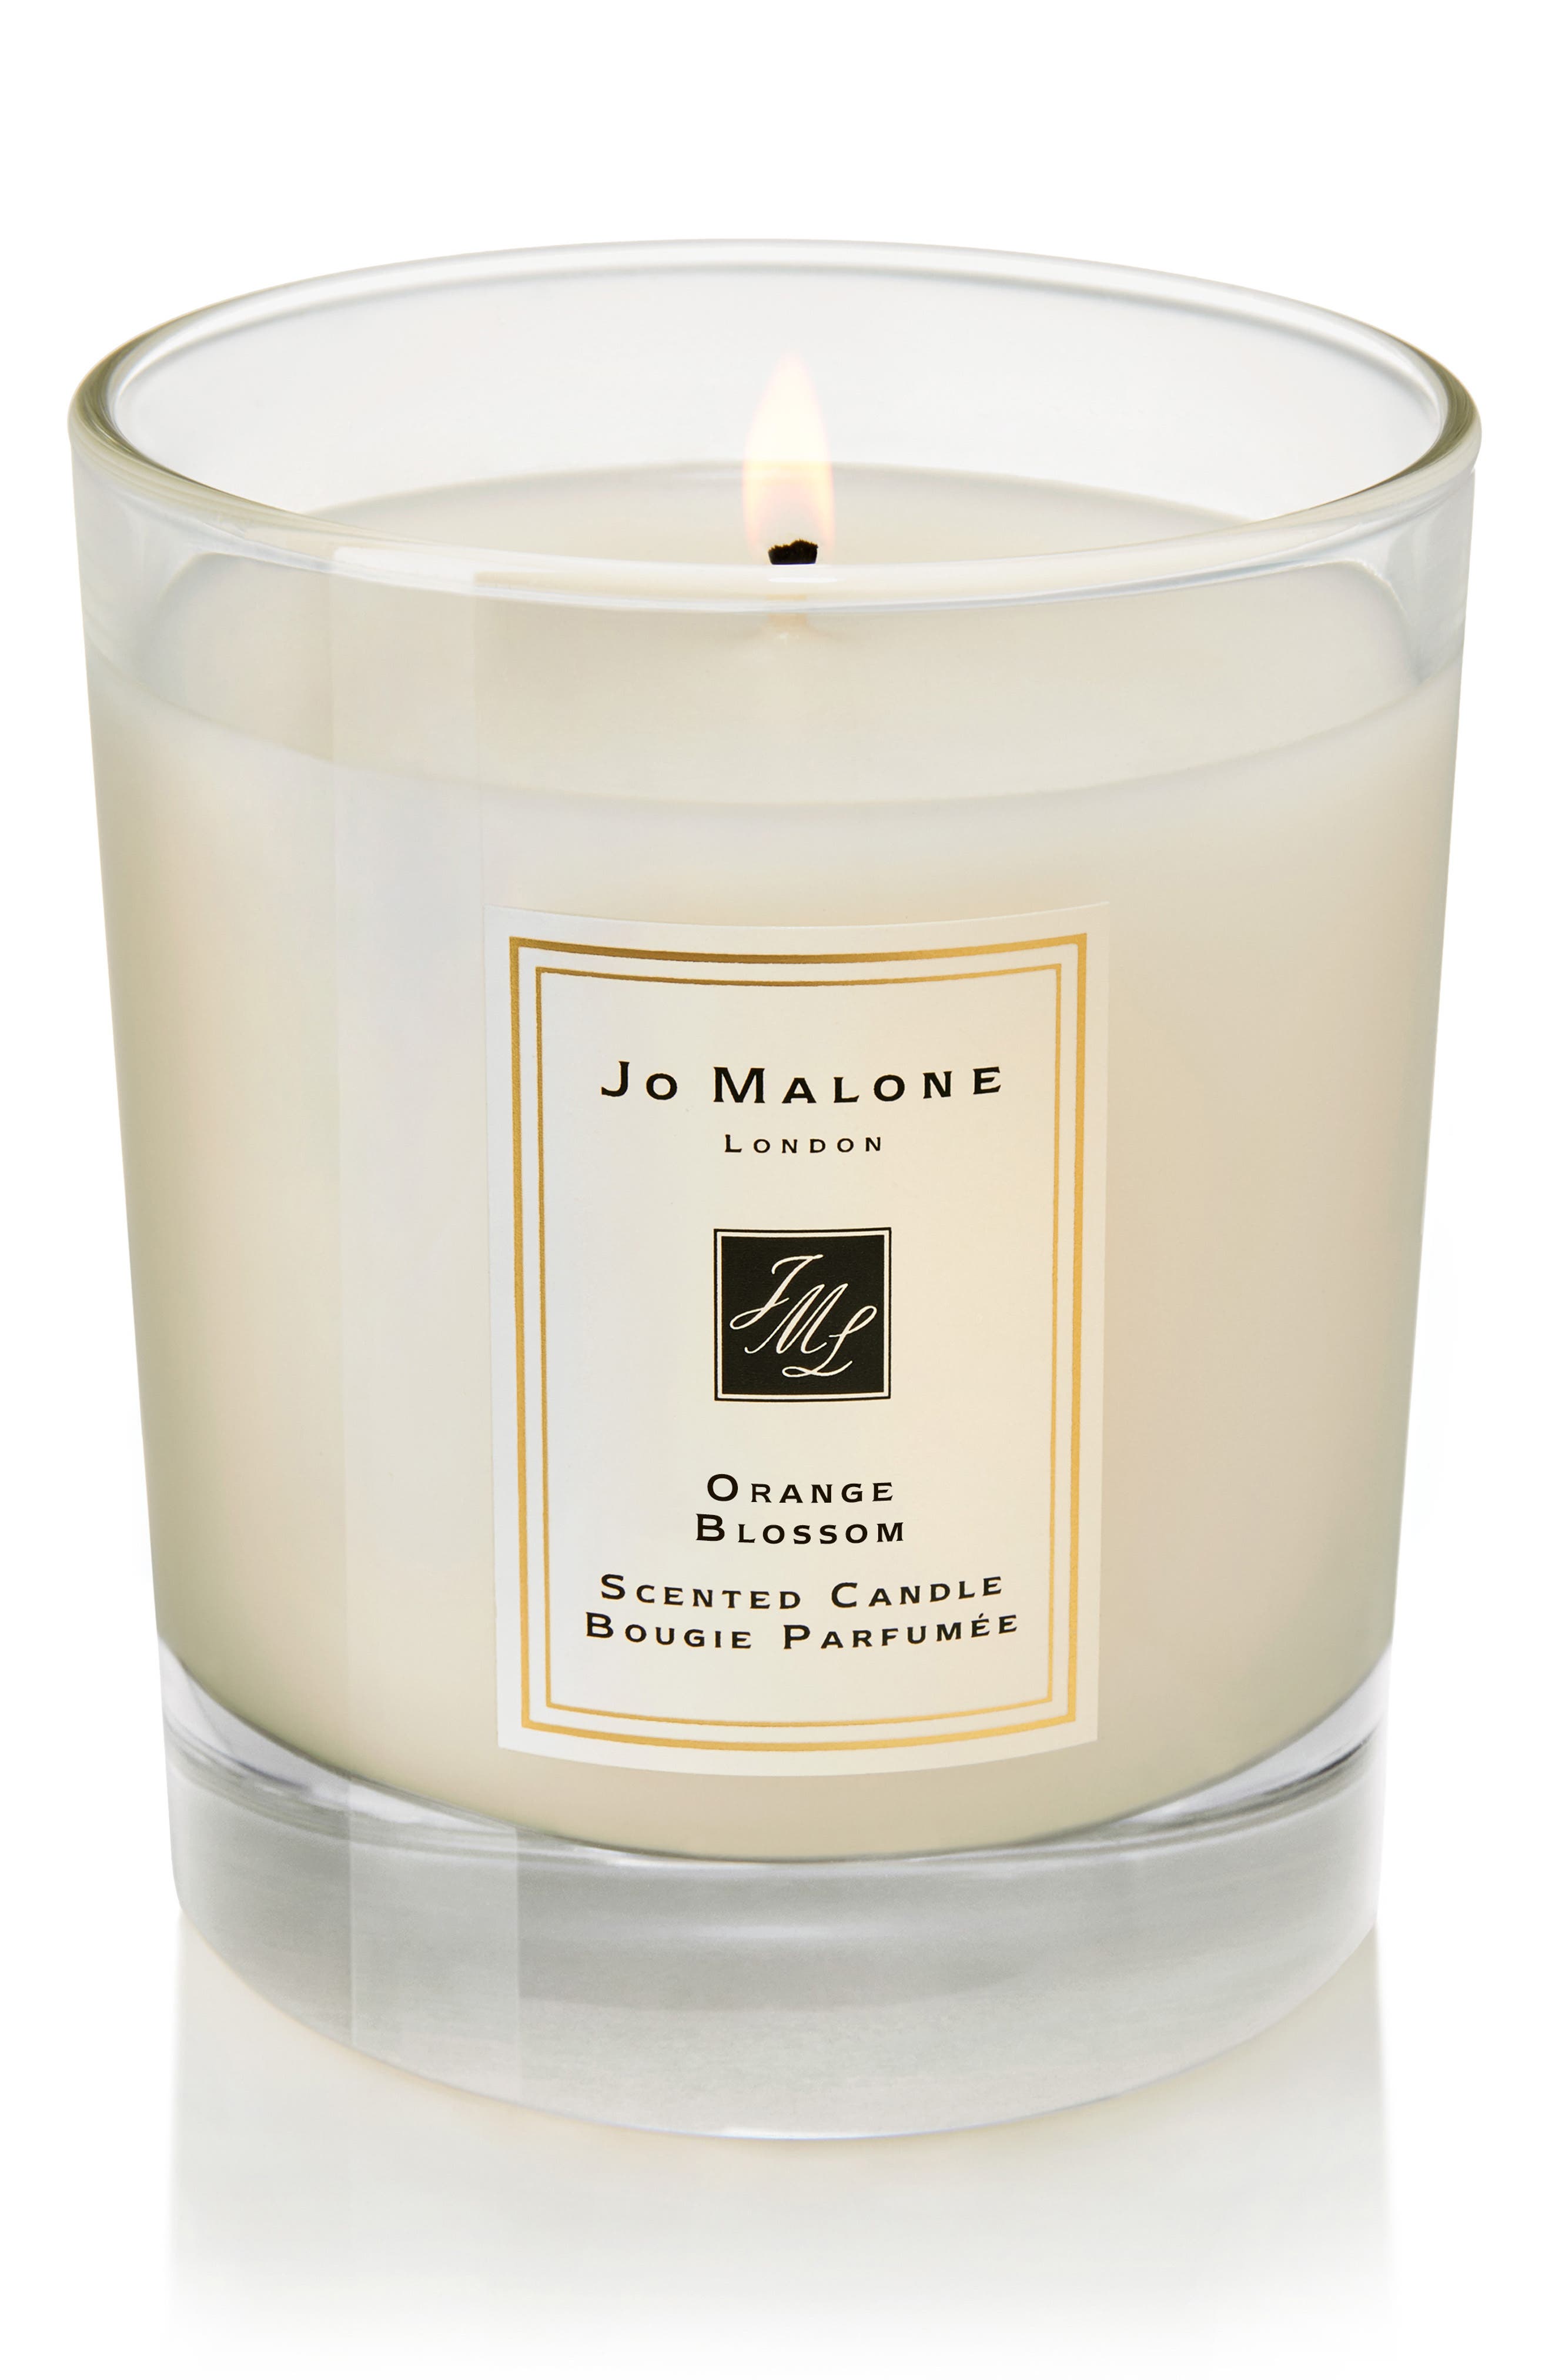 With Box 21.2 oz New Jo Malone Orange Bitters Deluxe Scented Candle 